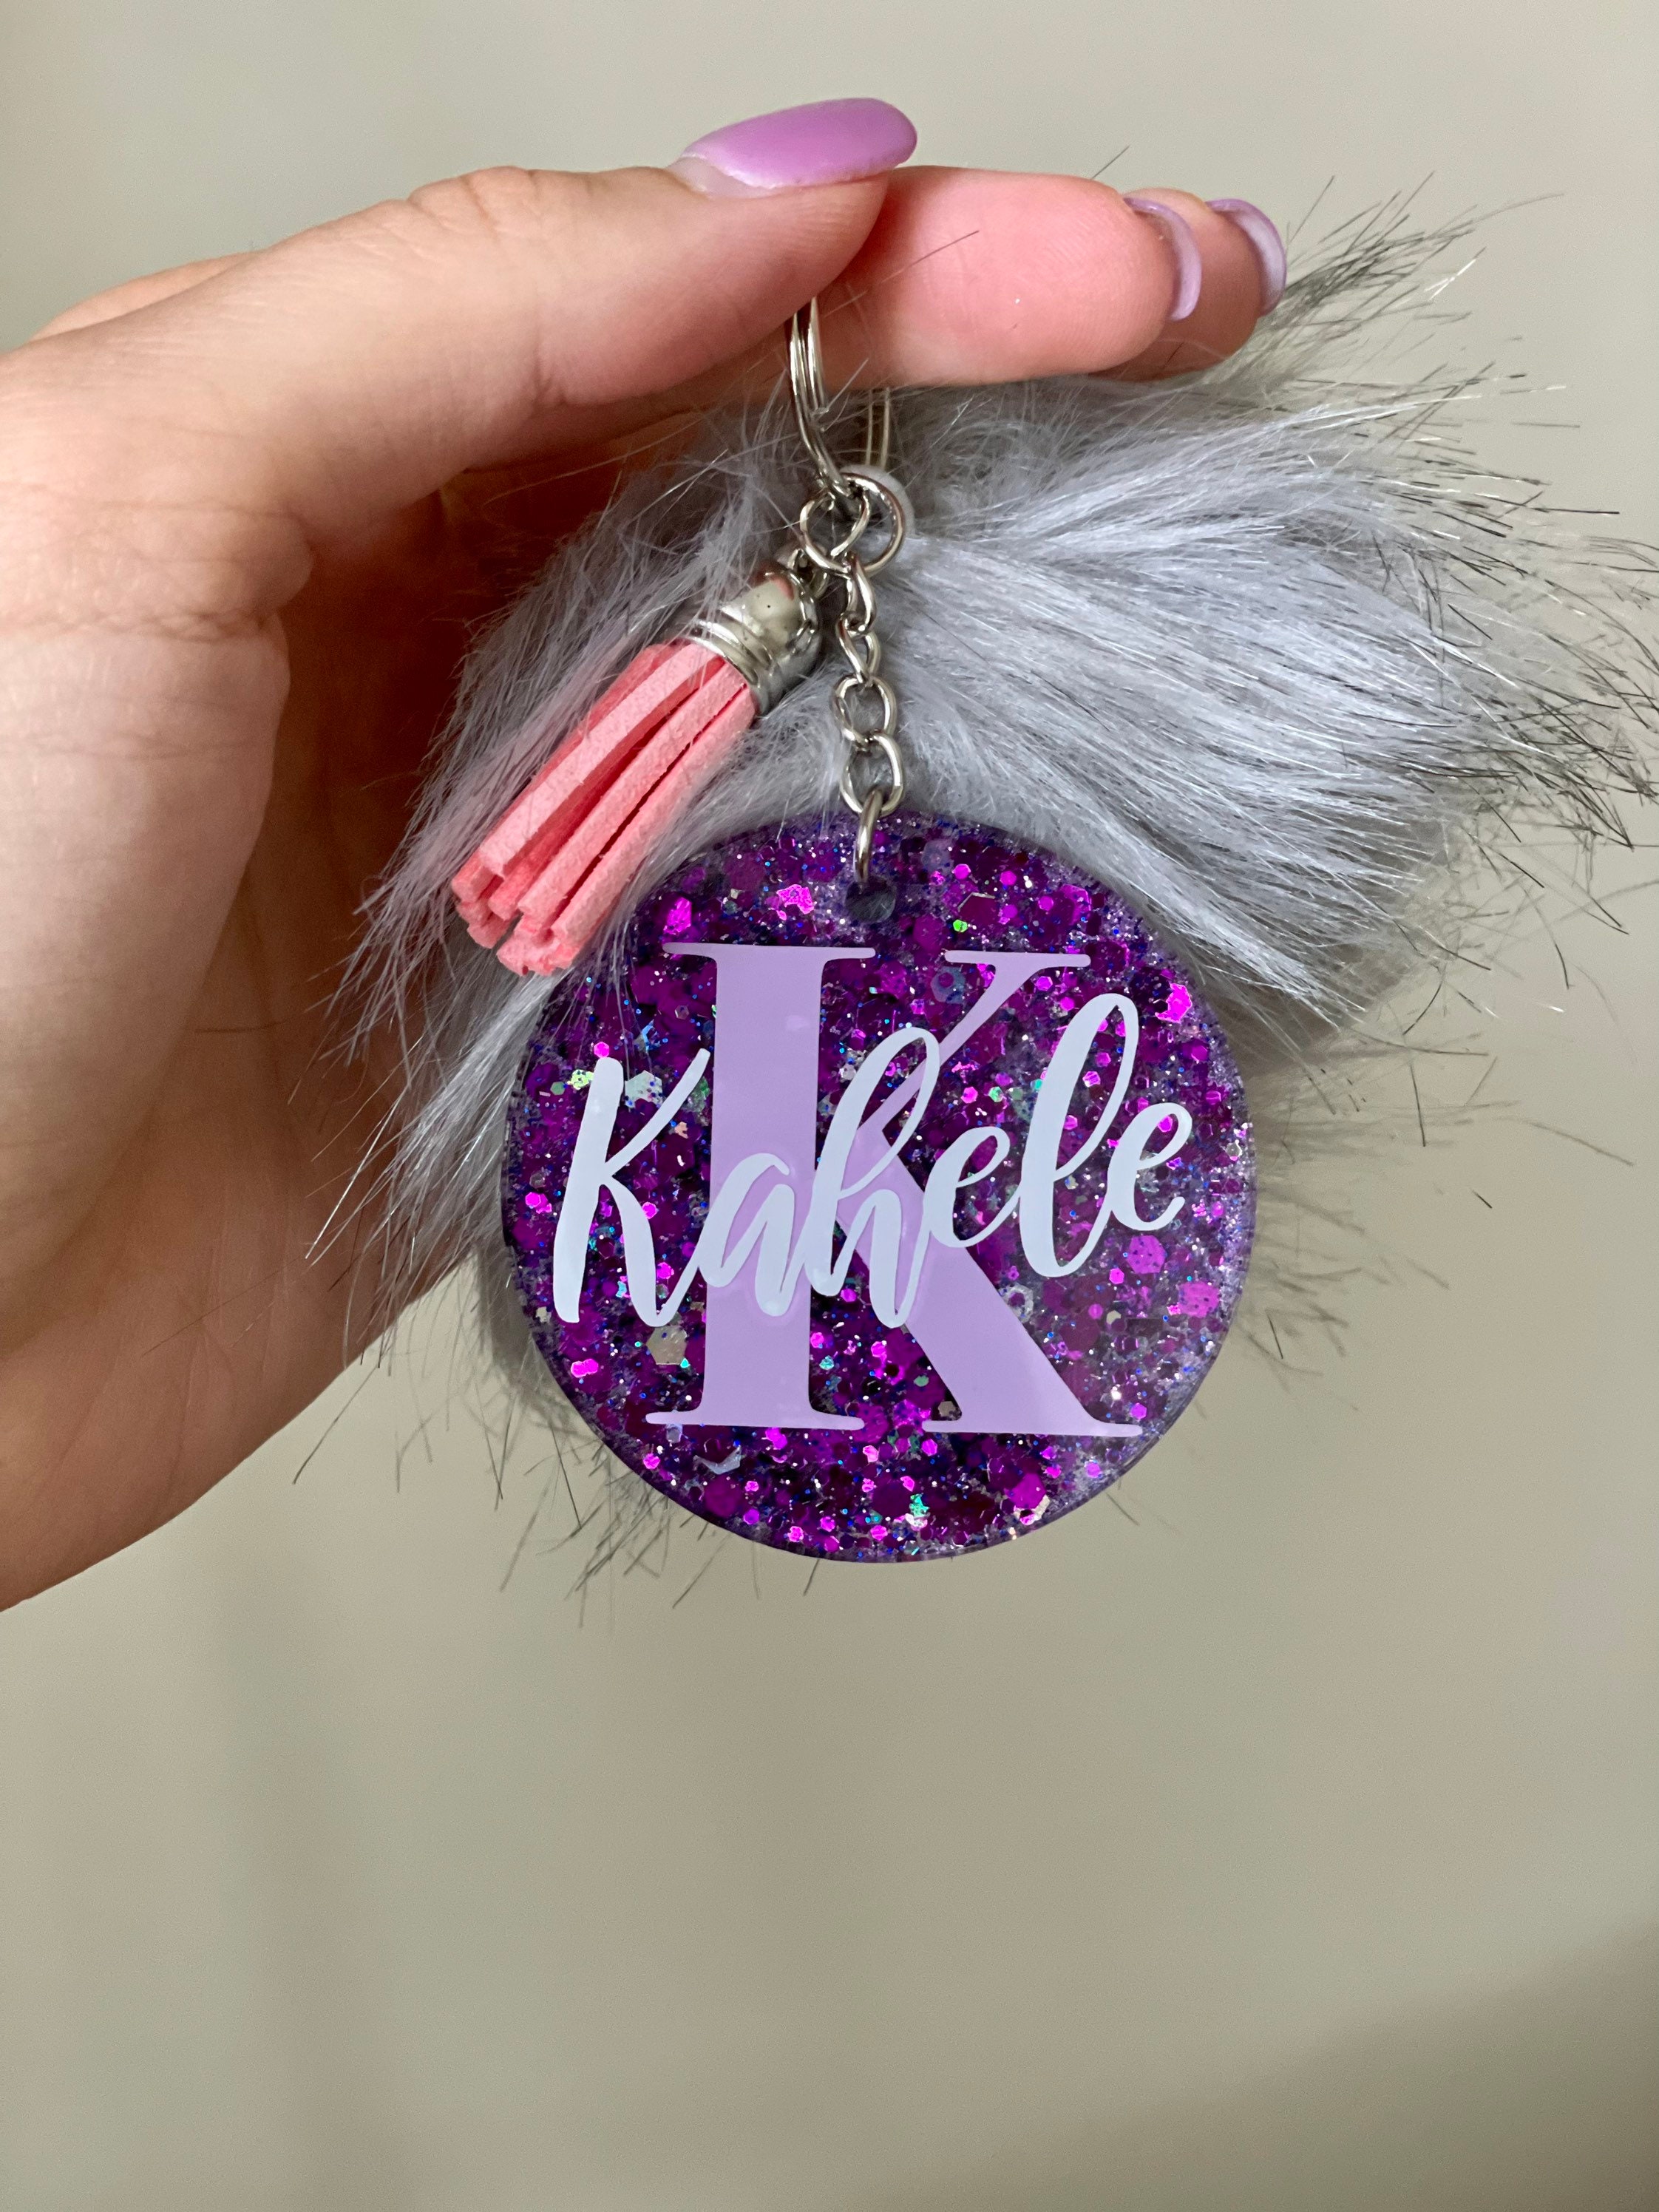 Clear Keychain Personalized Keychain Keychain With Tassel 2 Keychain Gift  Gift for Her Custom Keychain Holiday Gift 